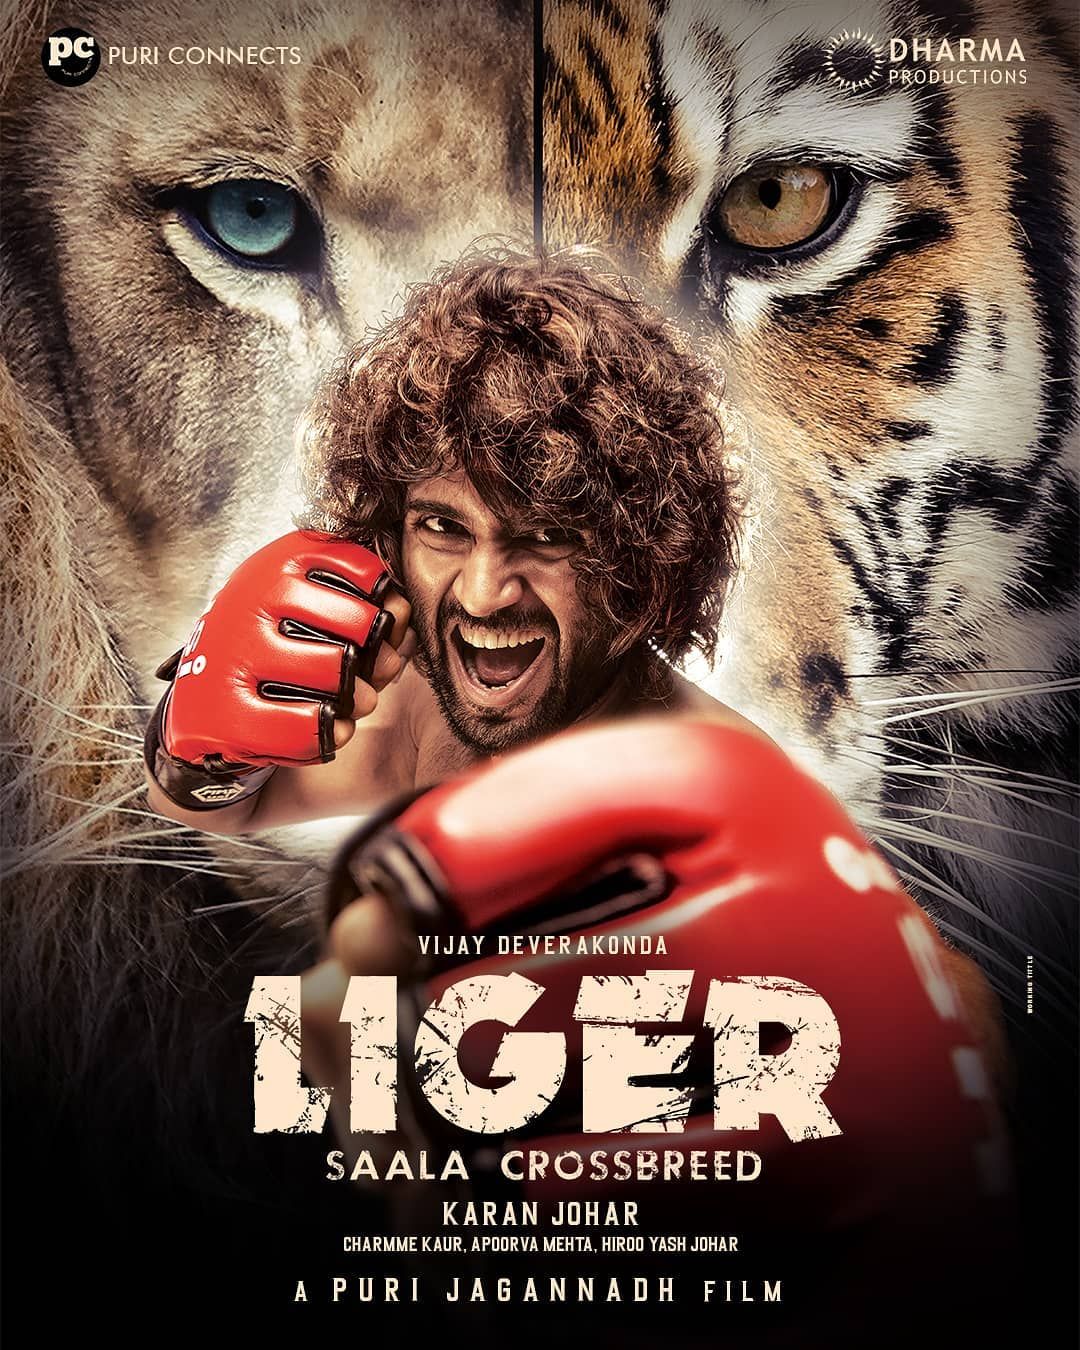 Vijay Deverakonda calls Rs. 200 crores offer for digital release of Liger 'too little', says "I'll do more in the theaters"